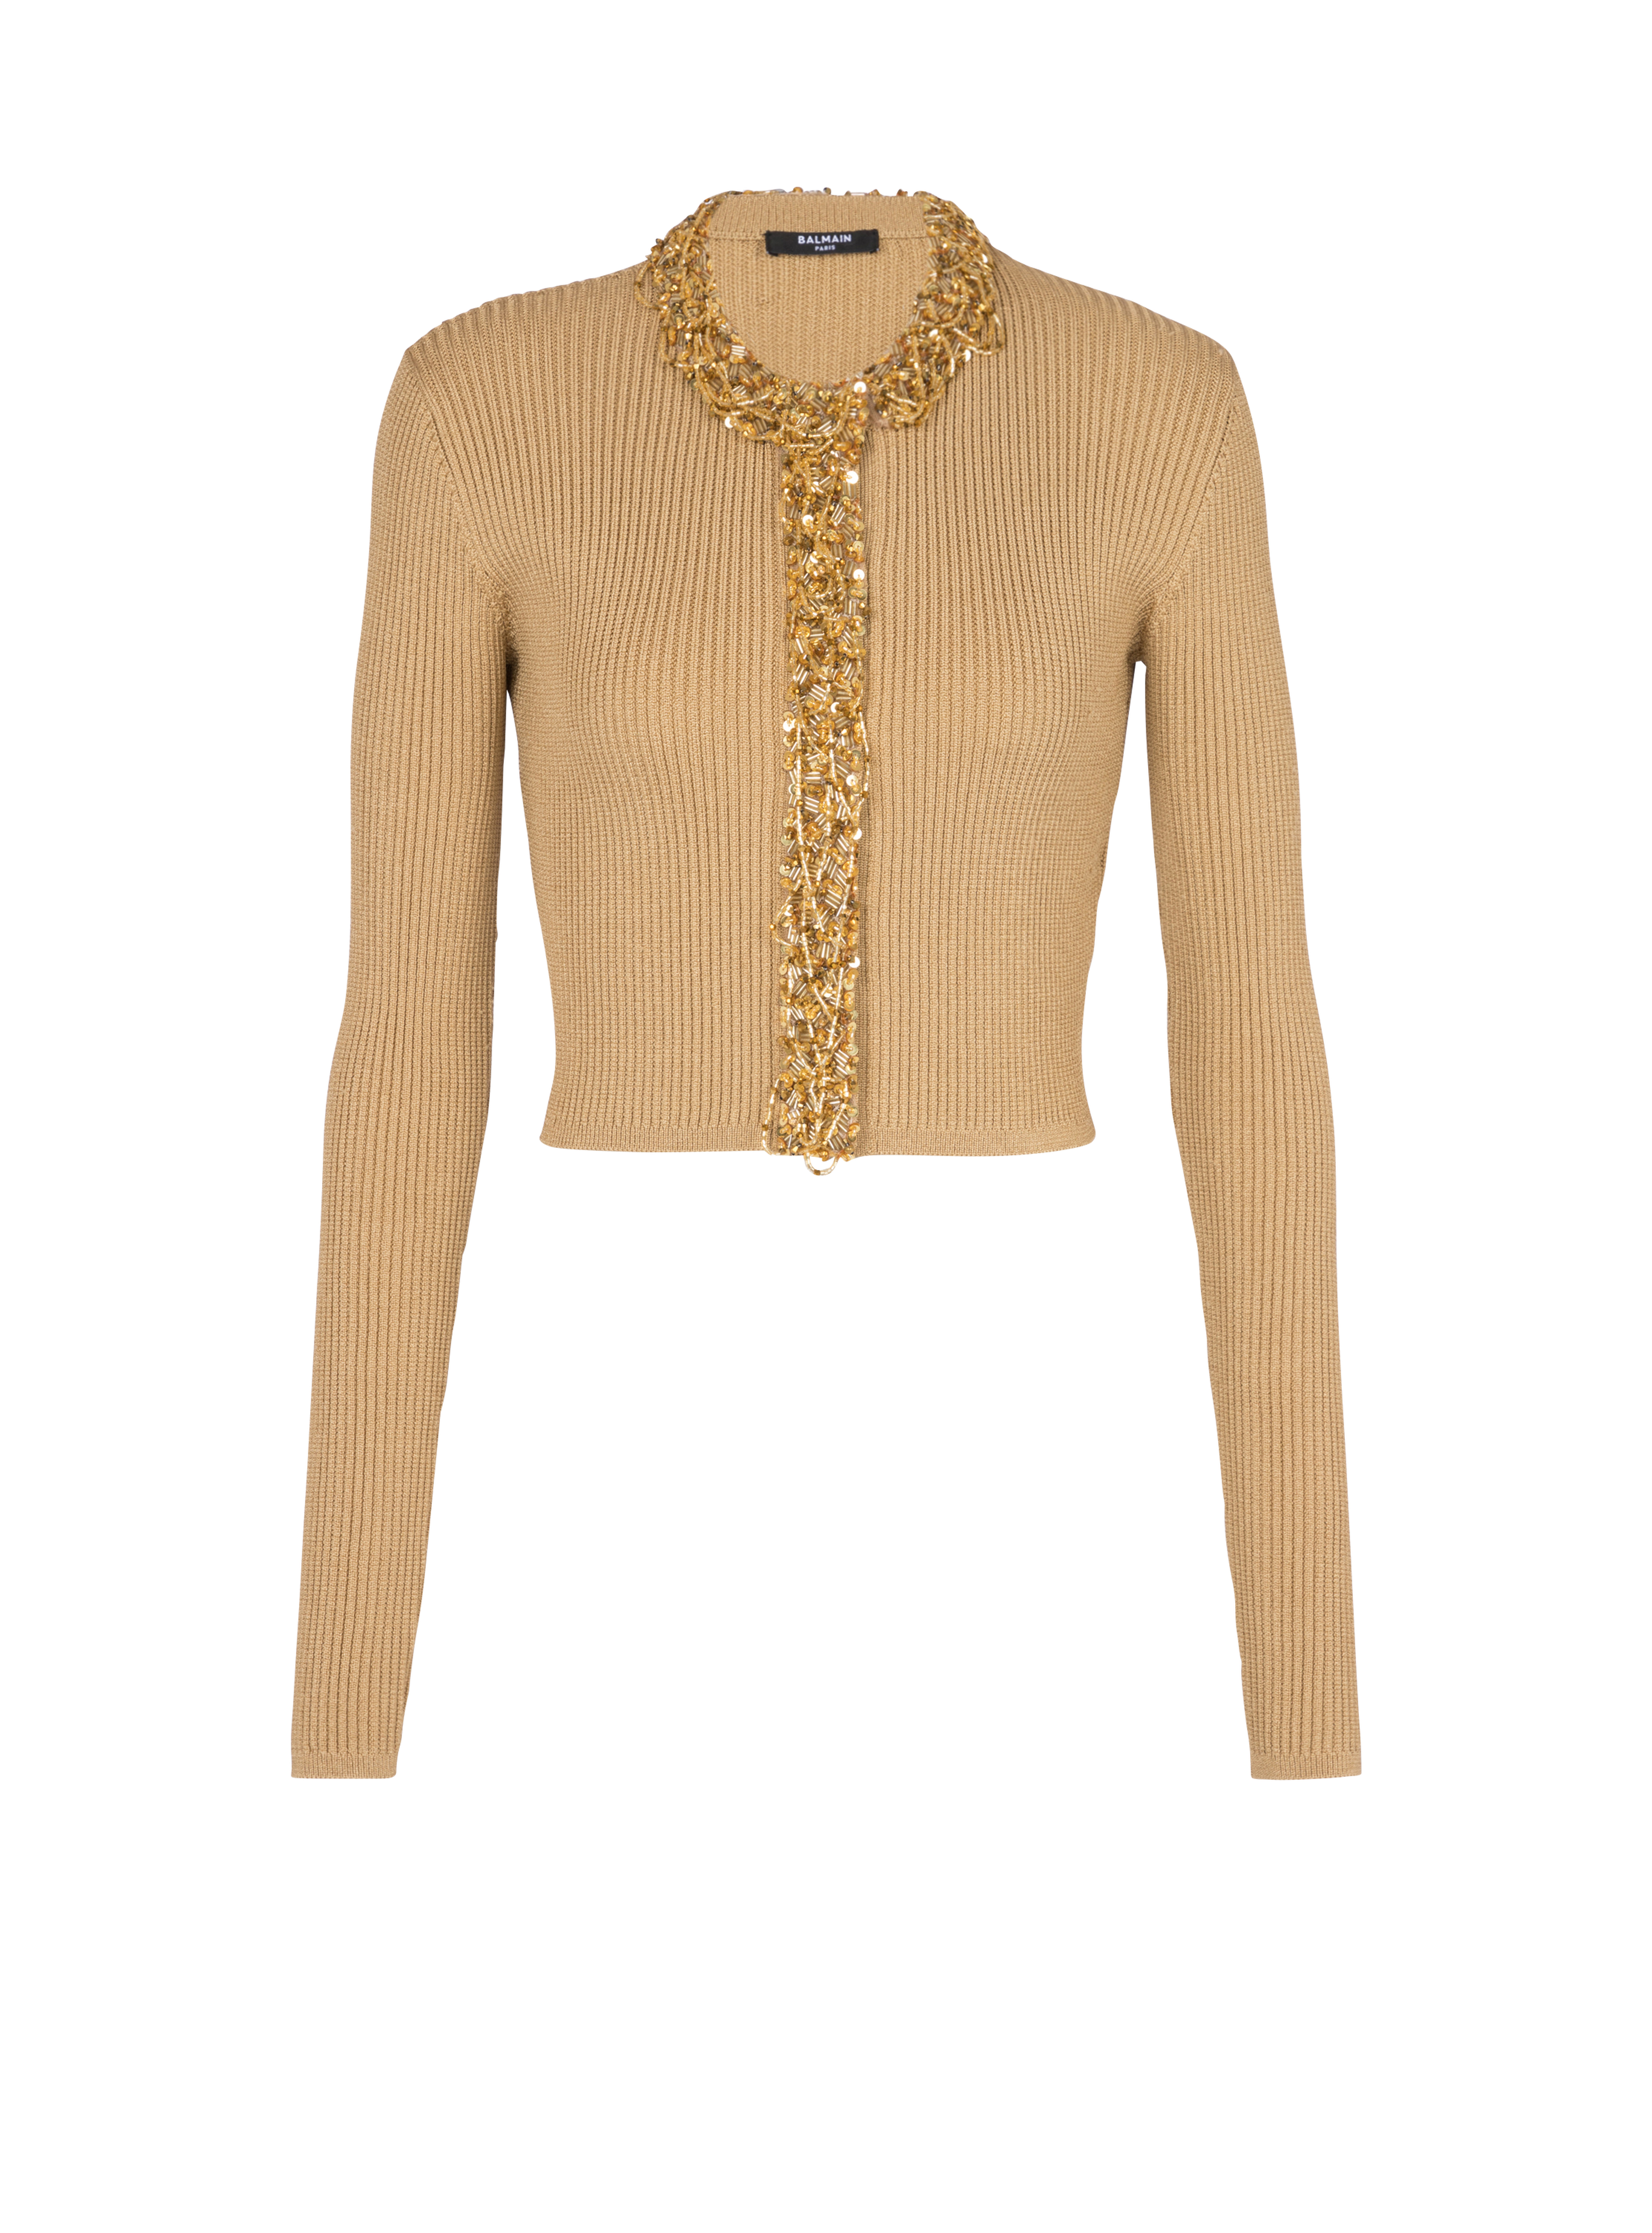 Embroidered knit cardigan, brown